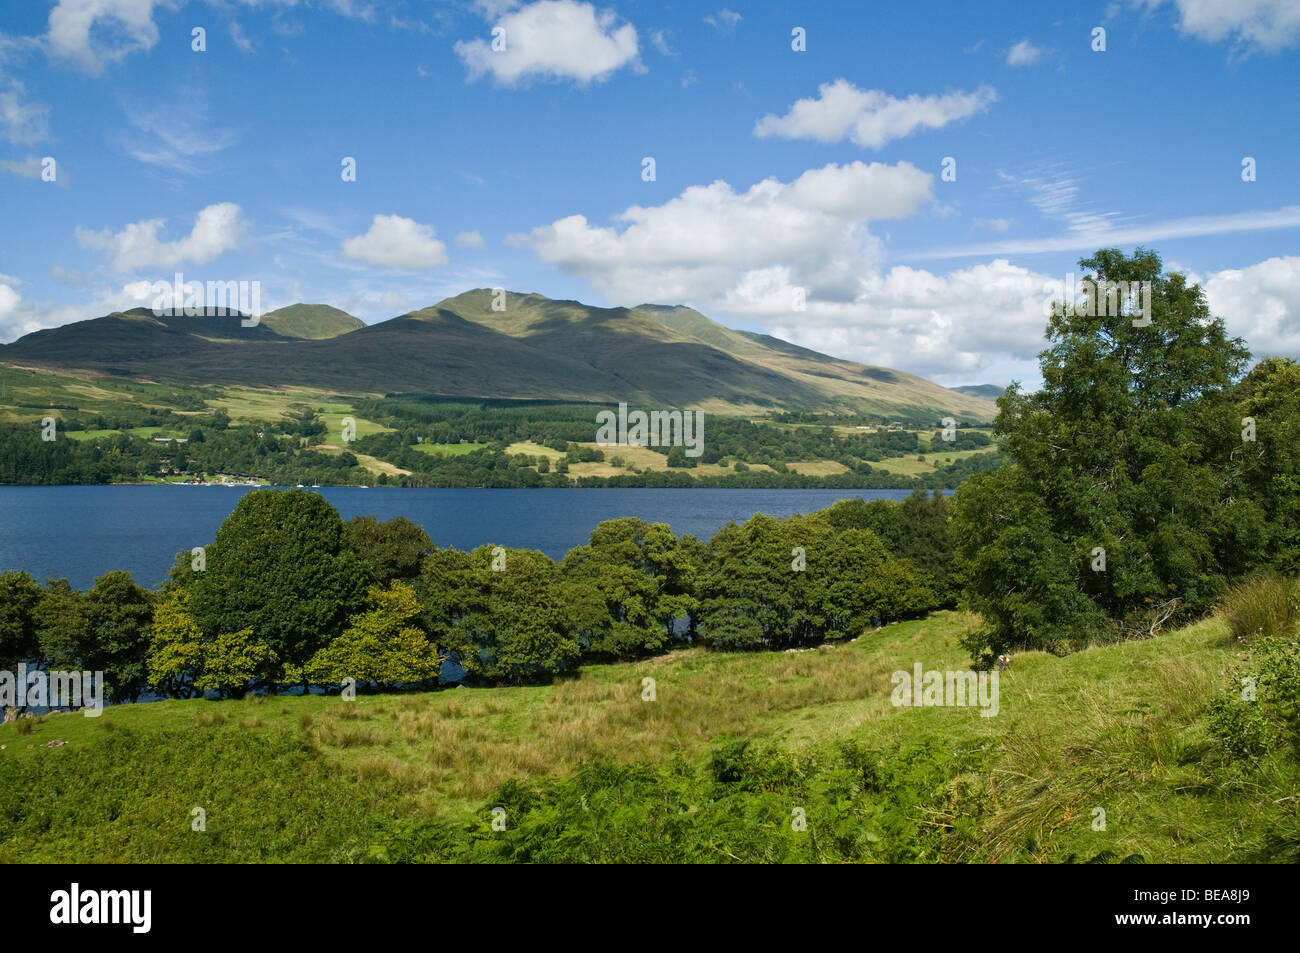 dh Ben Lawers mountain range LOCH TAY PERTHSHIRE Munros scottish scenic blue sky mountains landscape countryside scotland hills highlands Stock Photo